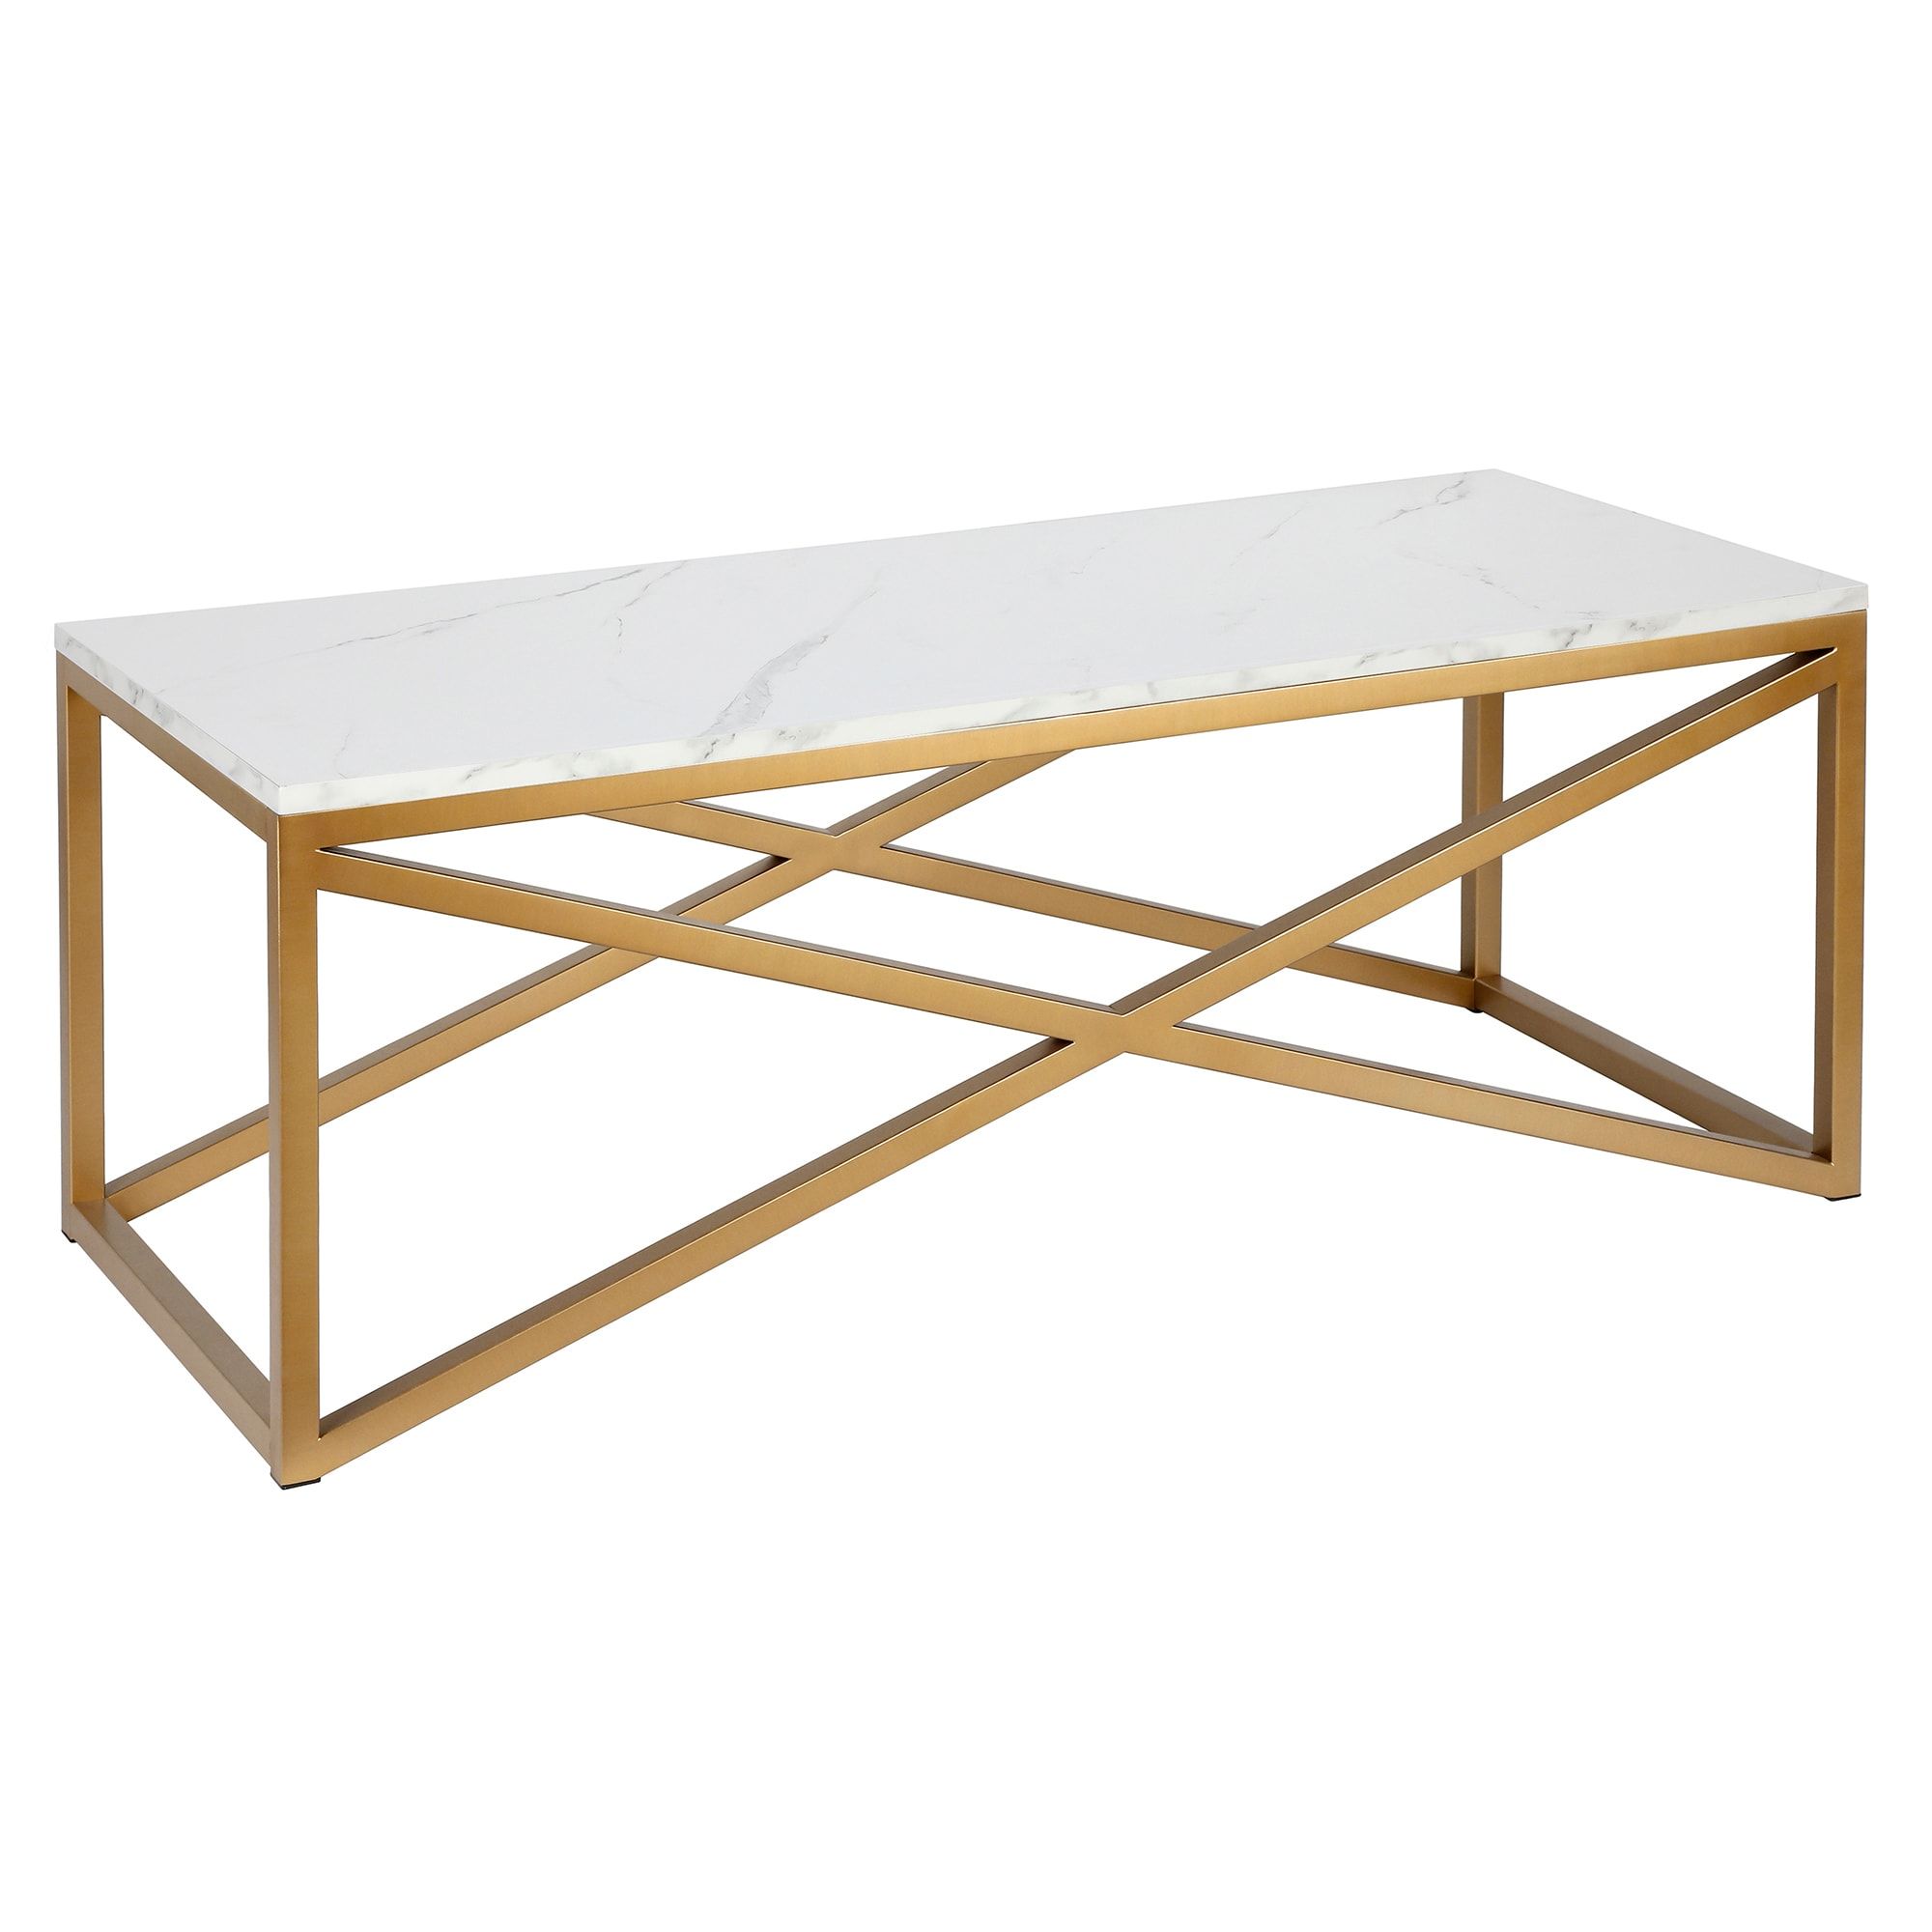 Calix Metal Coffee Tables At Lowes For Addison&amp;lane Calix Square Tables (Gallery 4 of 20)